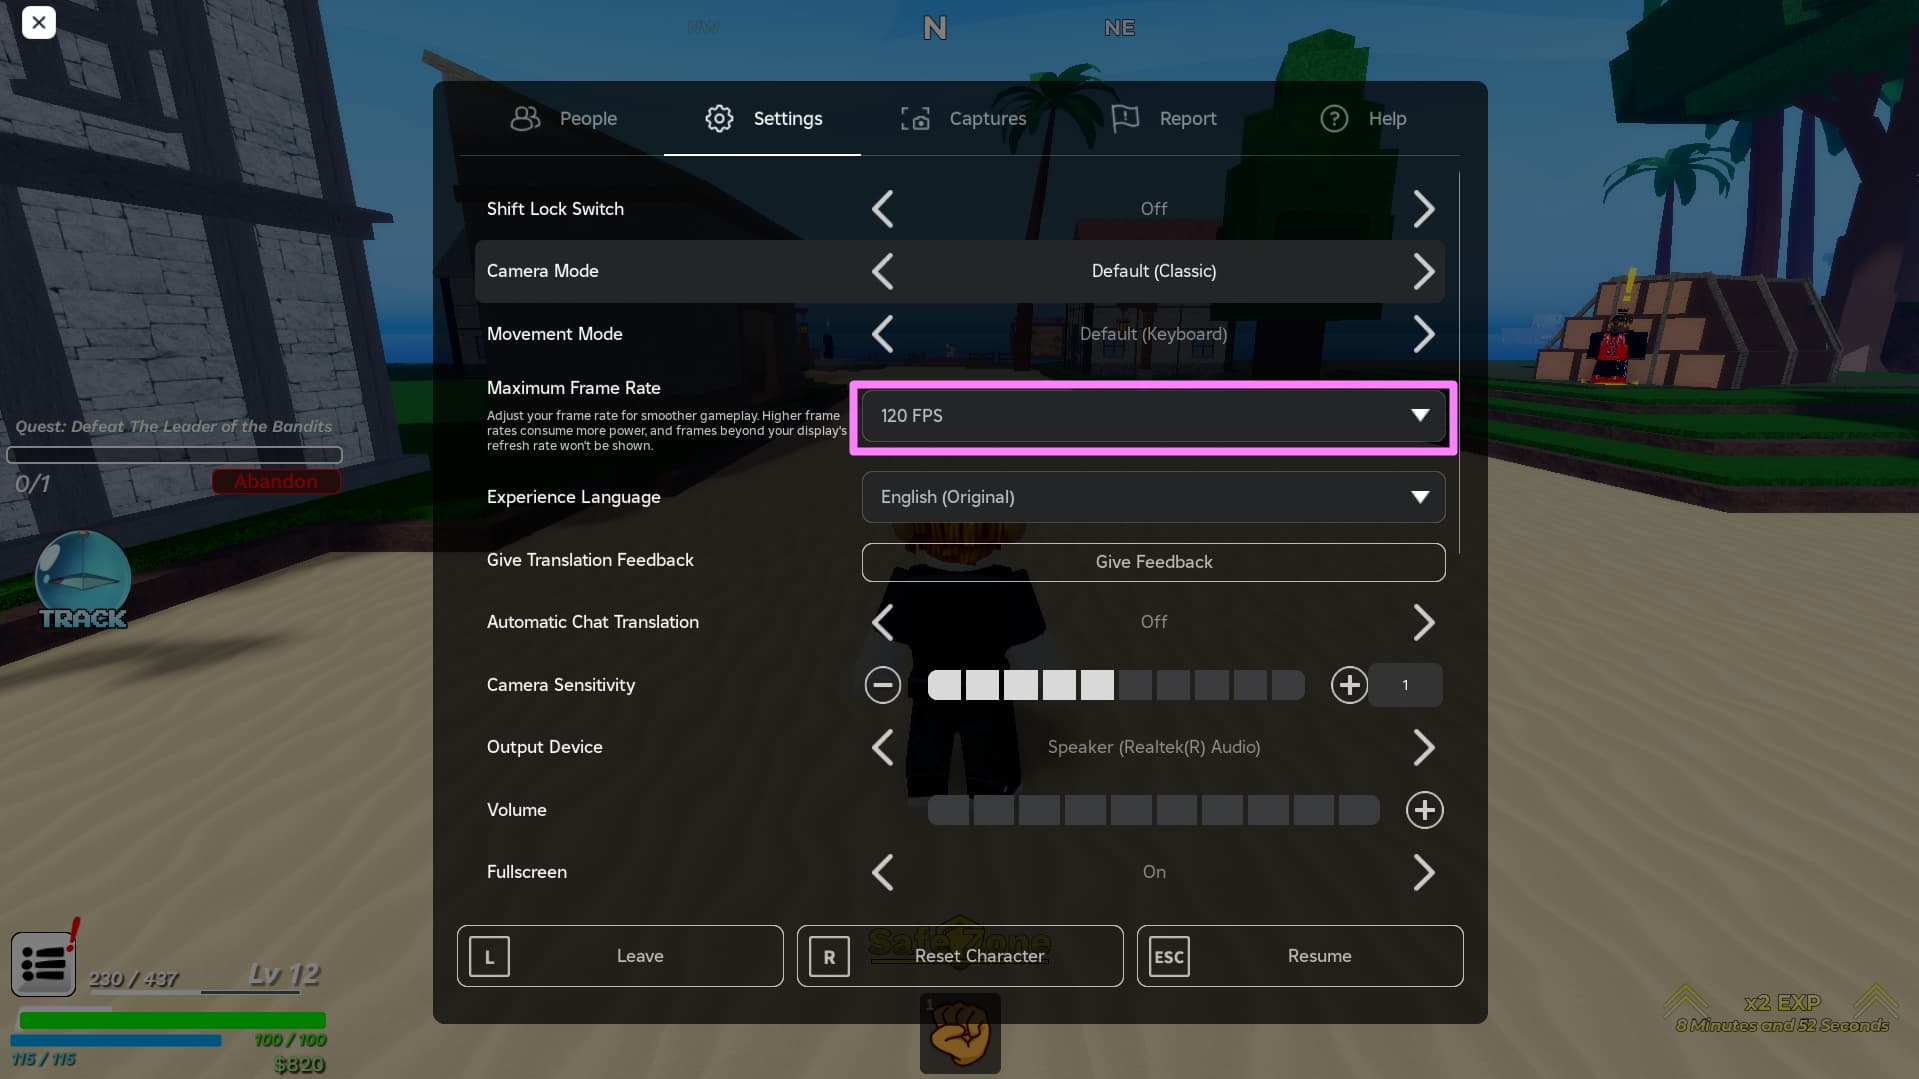 Roblox in-game settings menu showing framerate option